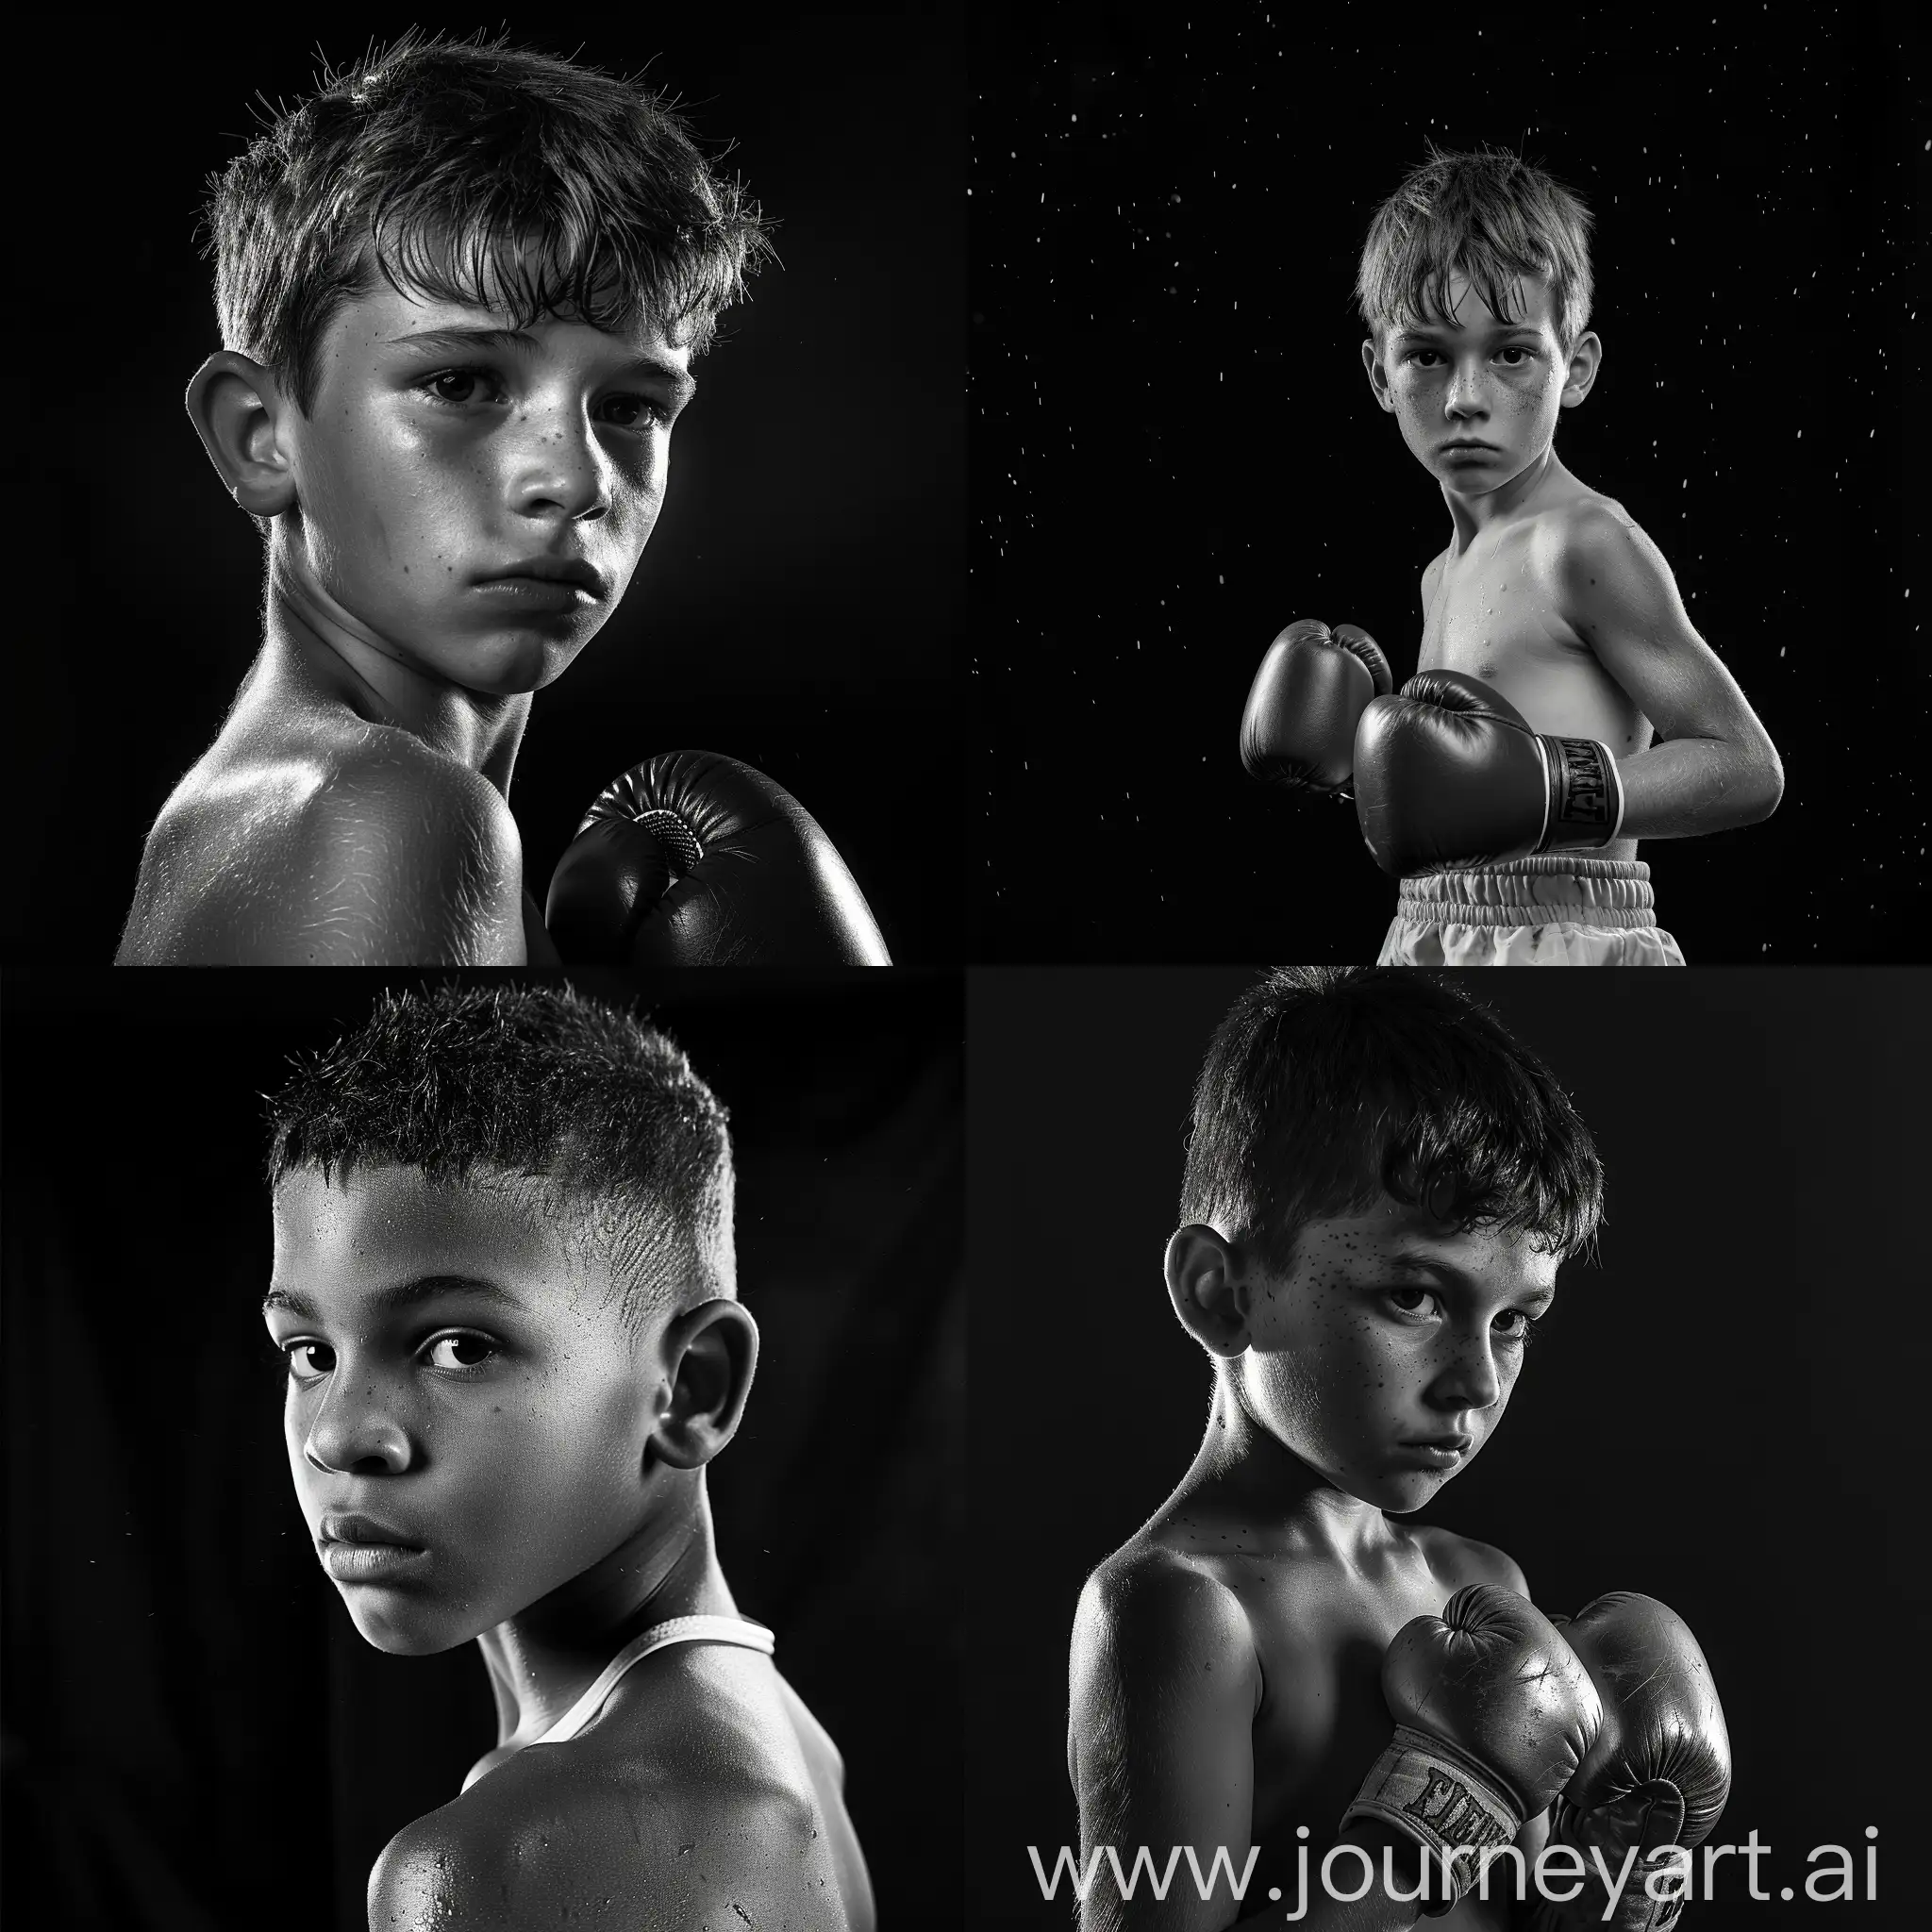 Young-Boxer-Boy-in-Black-and-White-Portrait